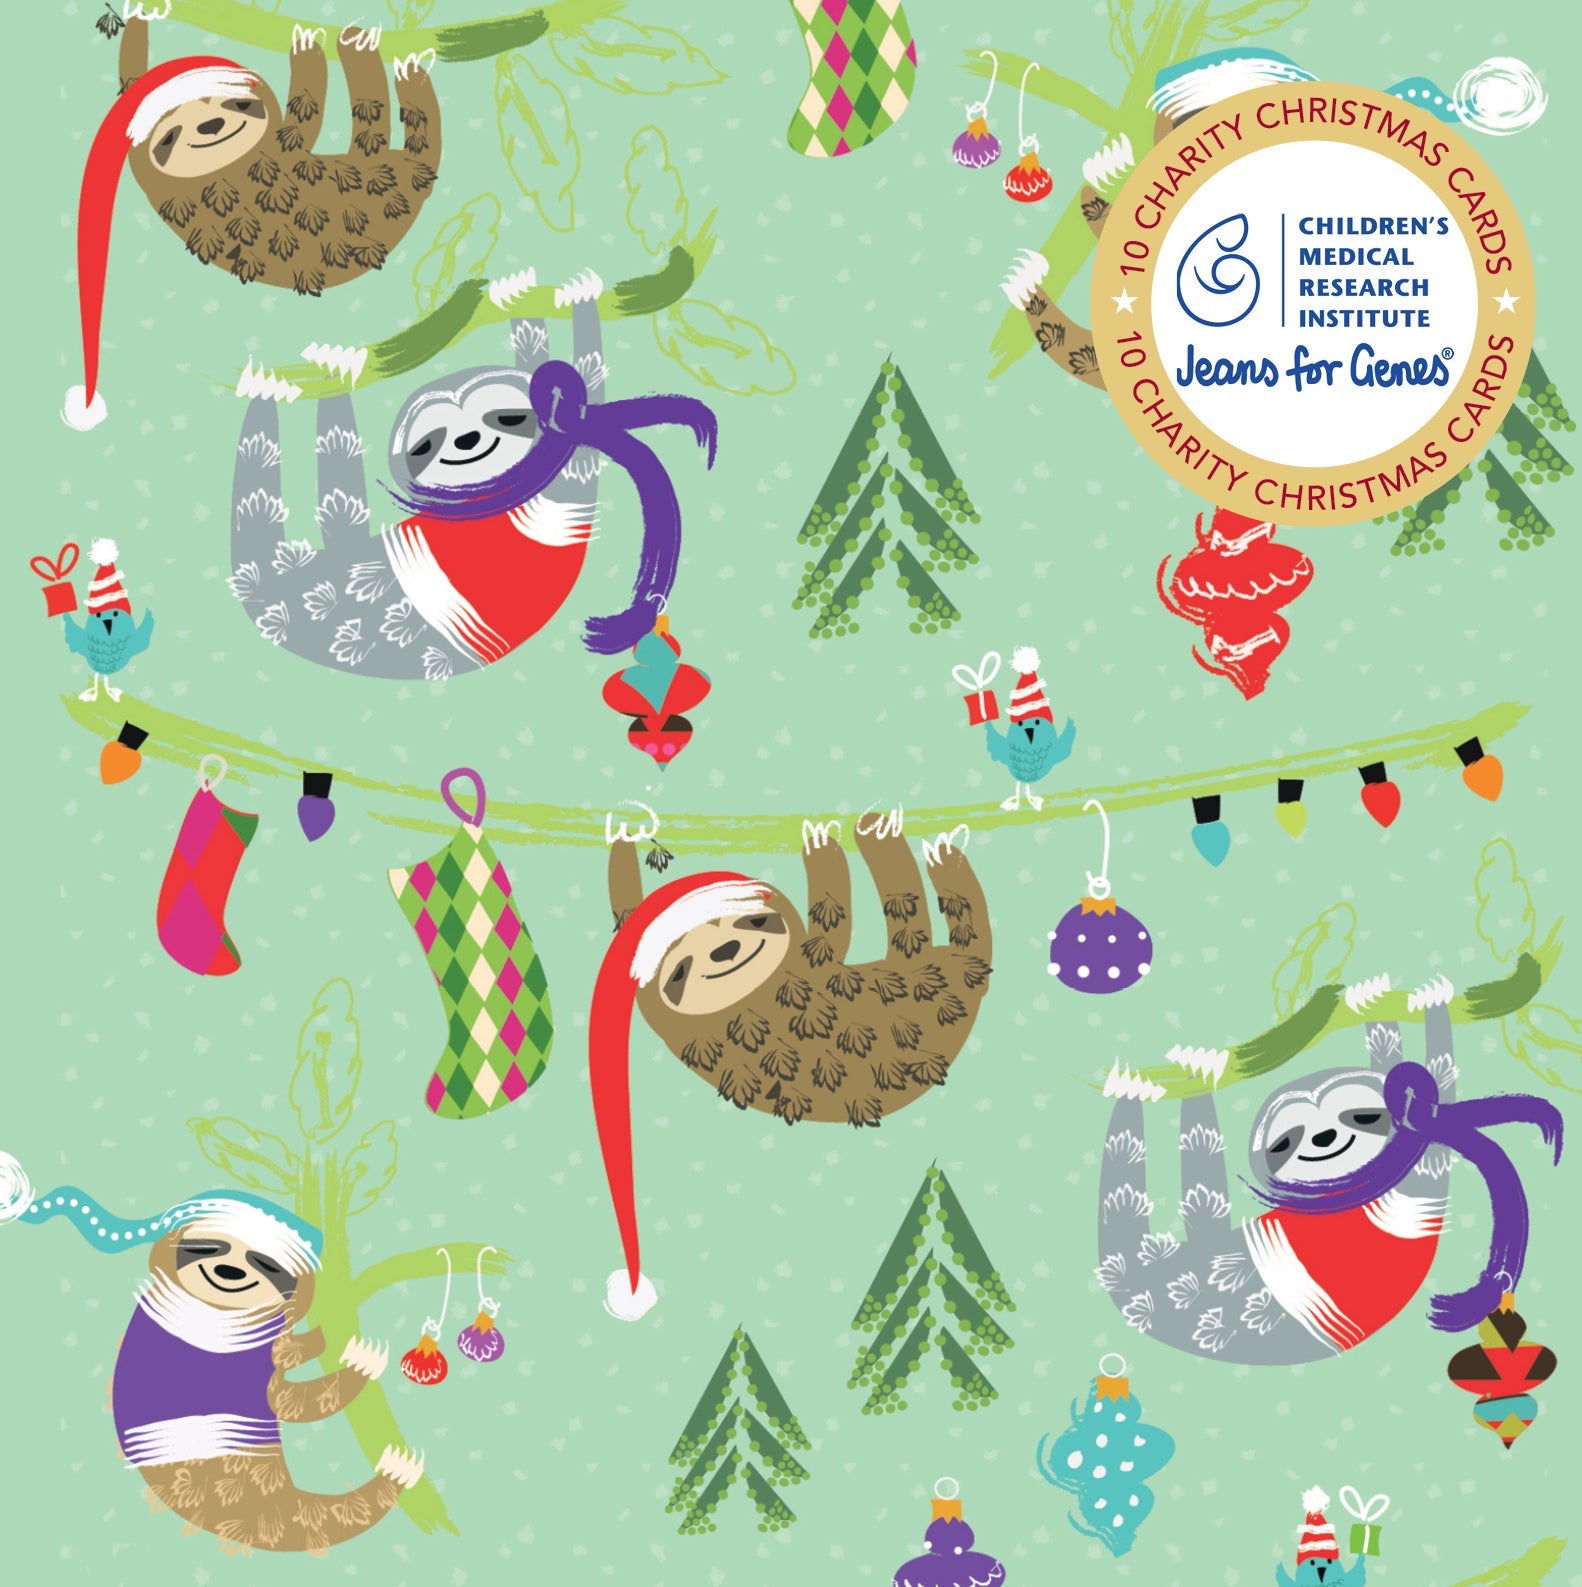 CMRI Hanging Sloths - 10 Charity Christmas Cards Pack